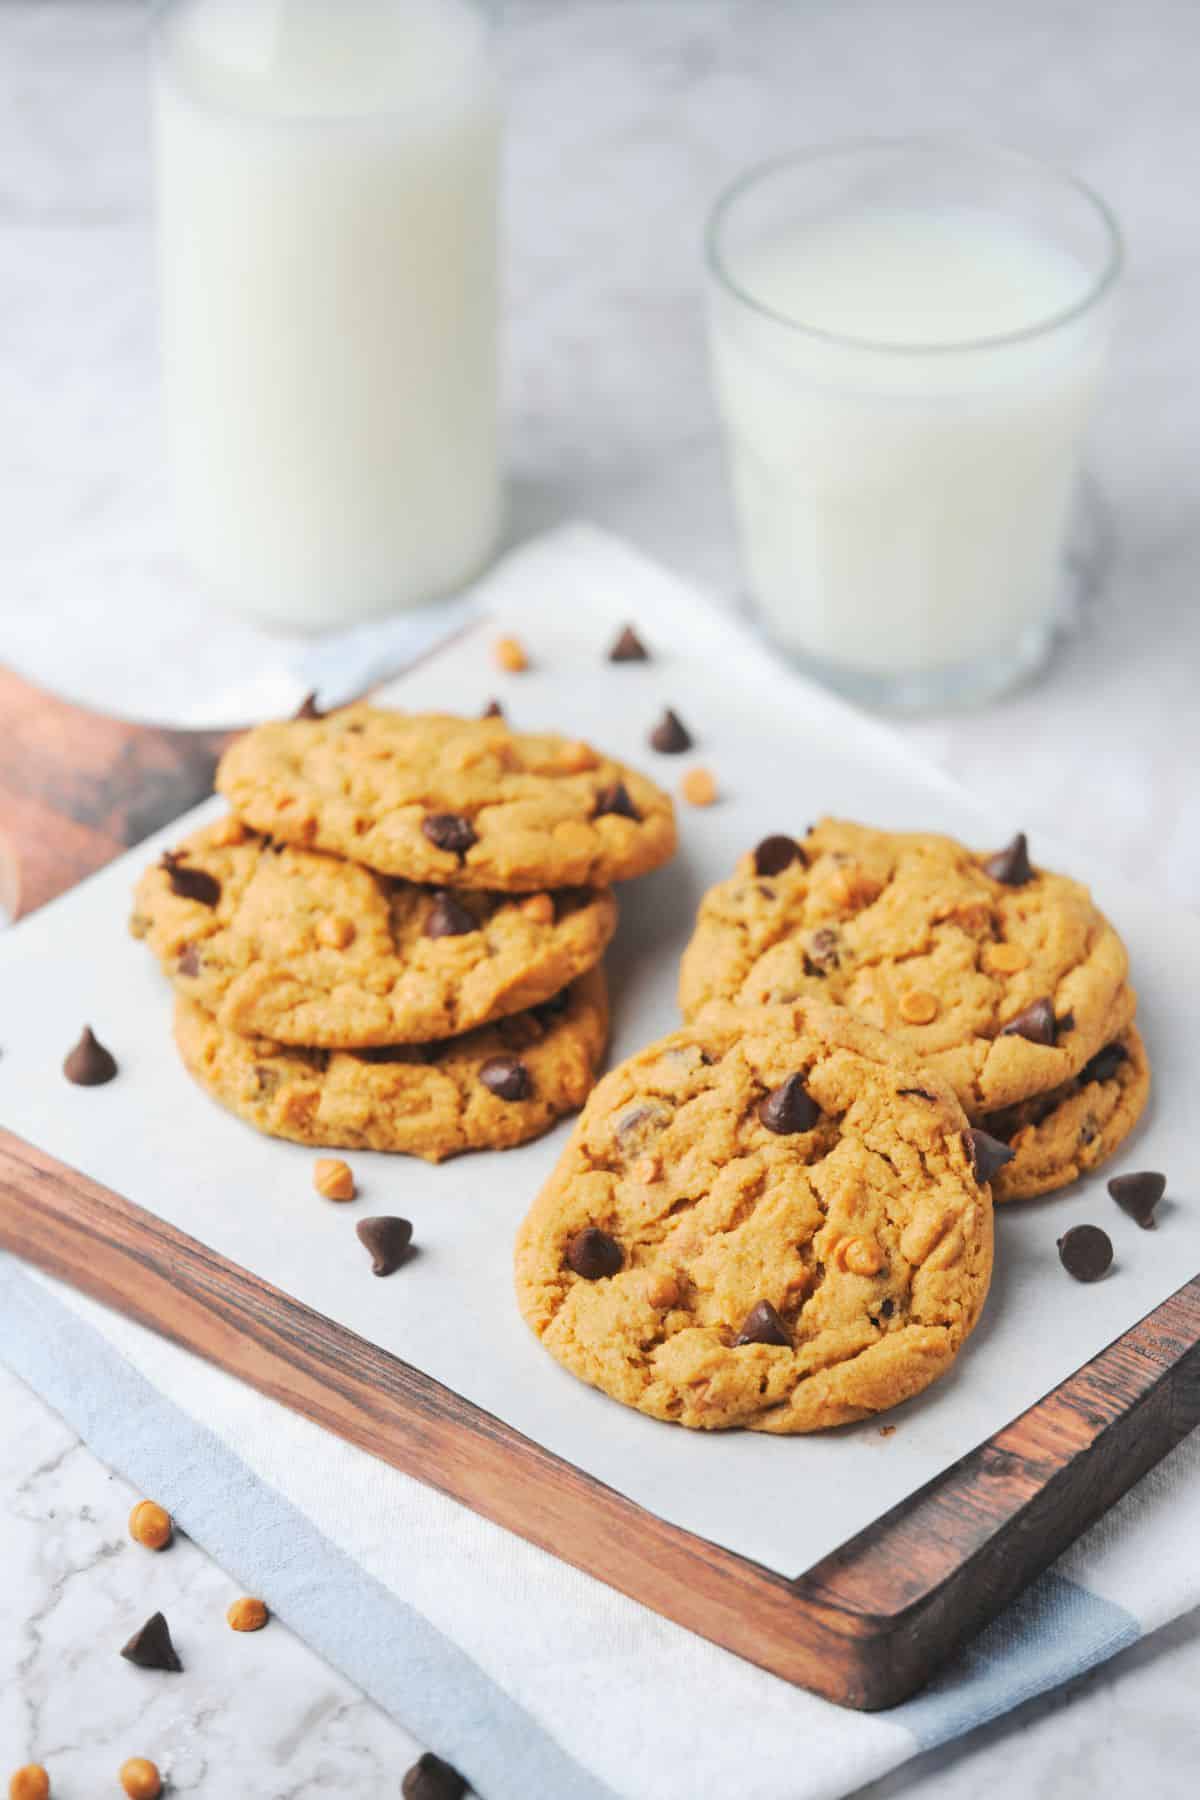 Several butterscotch chocolate chip cookies with 2 glasses of milk.